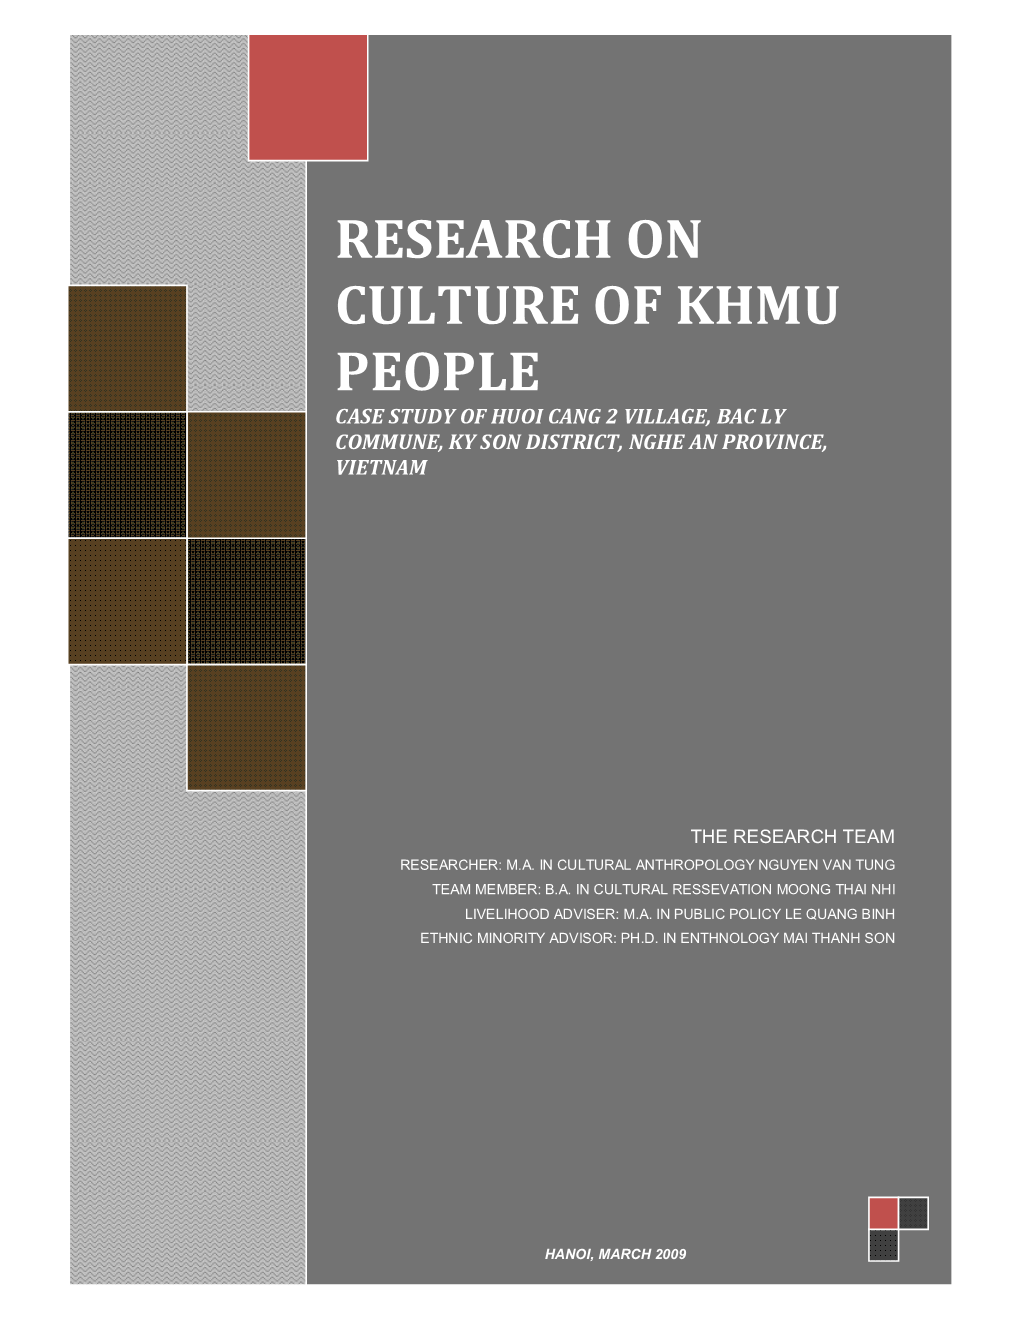 Research on Culture of Khmu People Case Study of Huoi Cang 2 Village, Bac Ly Commune, Ky Son District, Nghe an Province, Vietnam